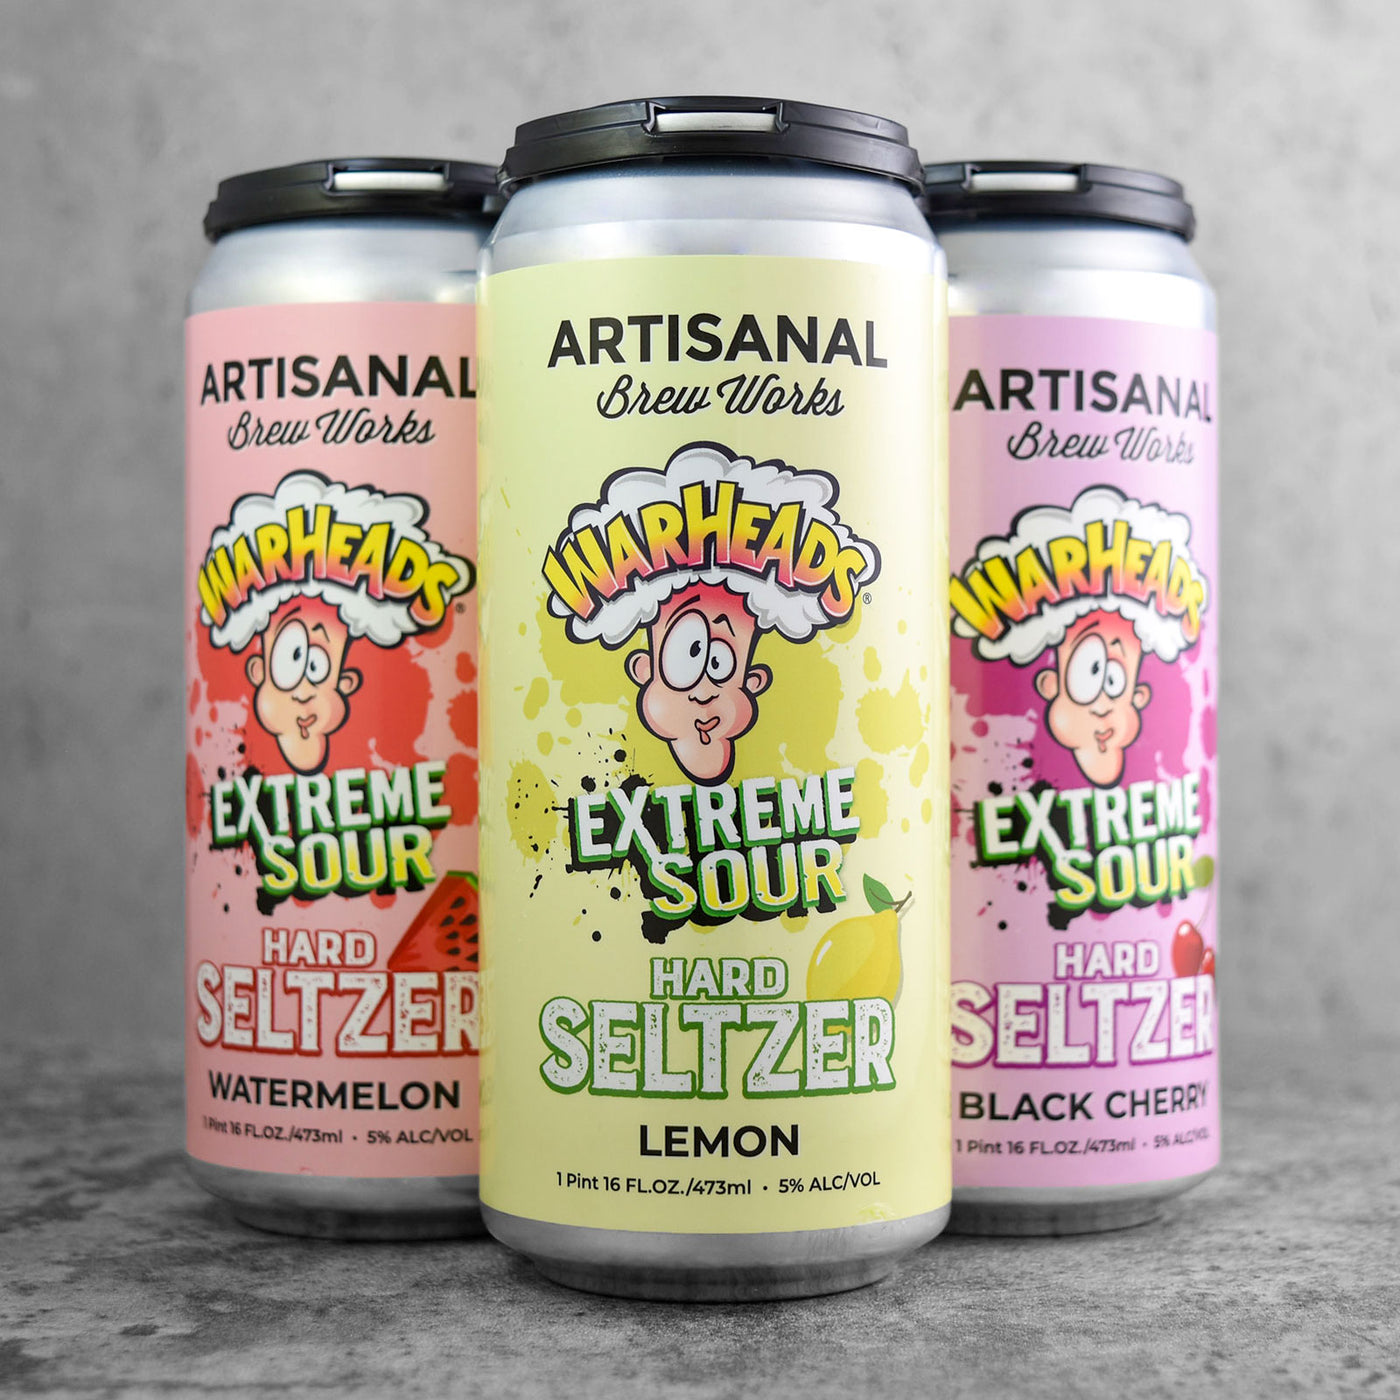 Artisanal Brew Works Warheads Extreme Sour Hard Seltzers - Mix Pack #1